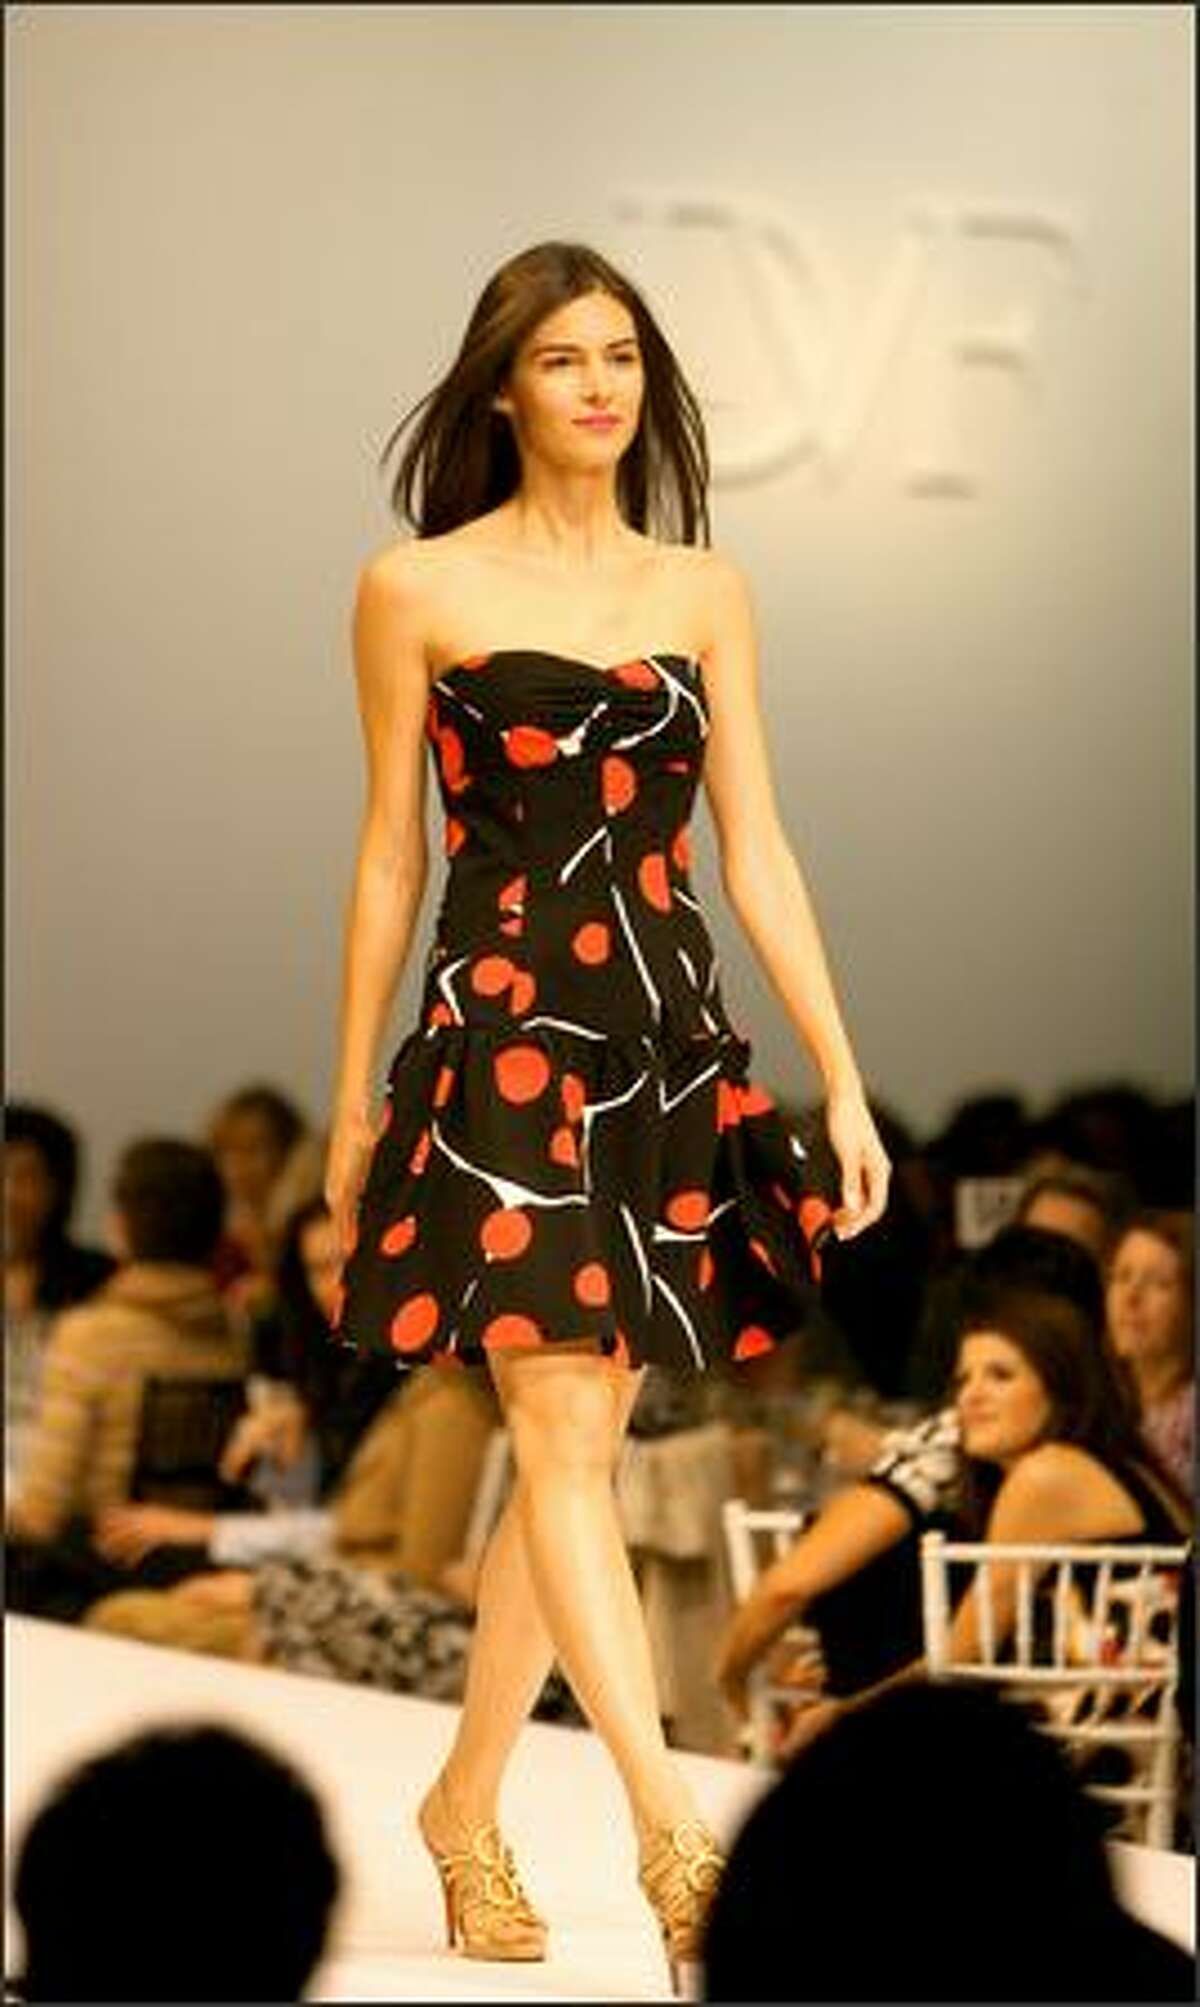 A model displays a ladybug-print "Basilica" strapless dress at the annual Nordstrom Fashion Ovation fashion show to benefit Seattle Repertory Theatre, centering on designs by special guest Diane von Furstenberg.